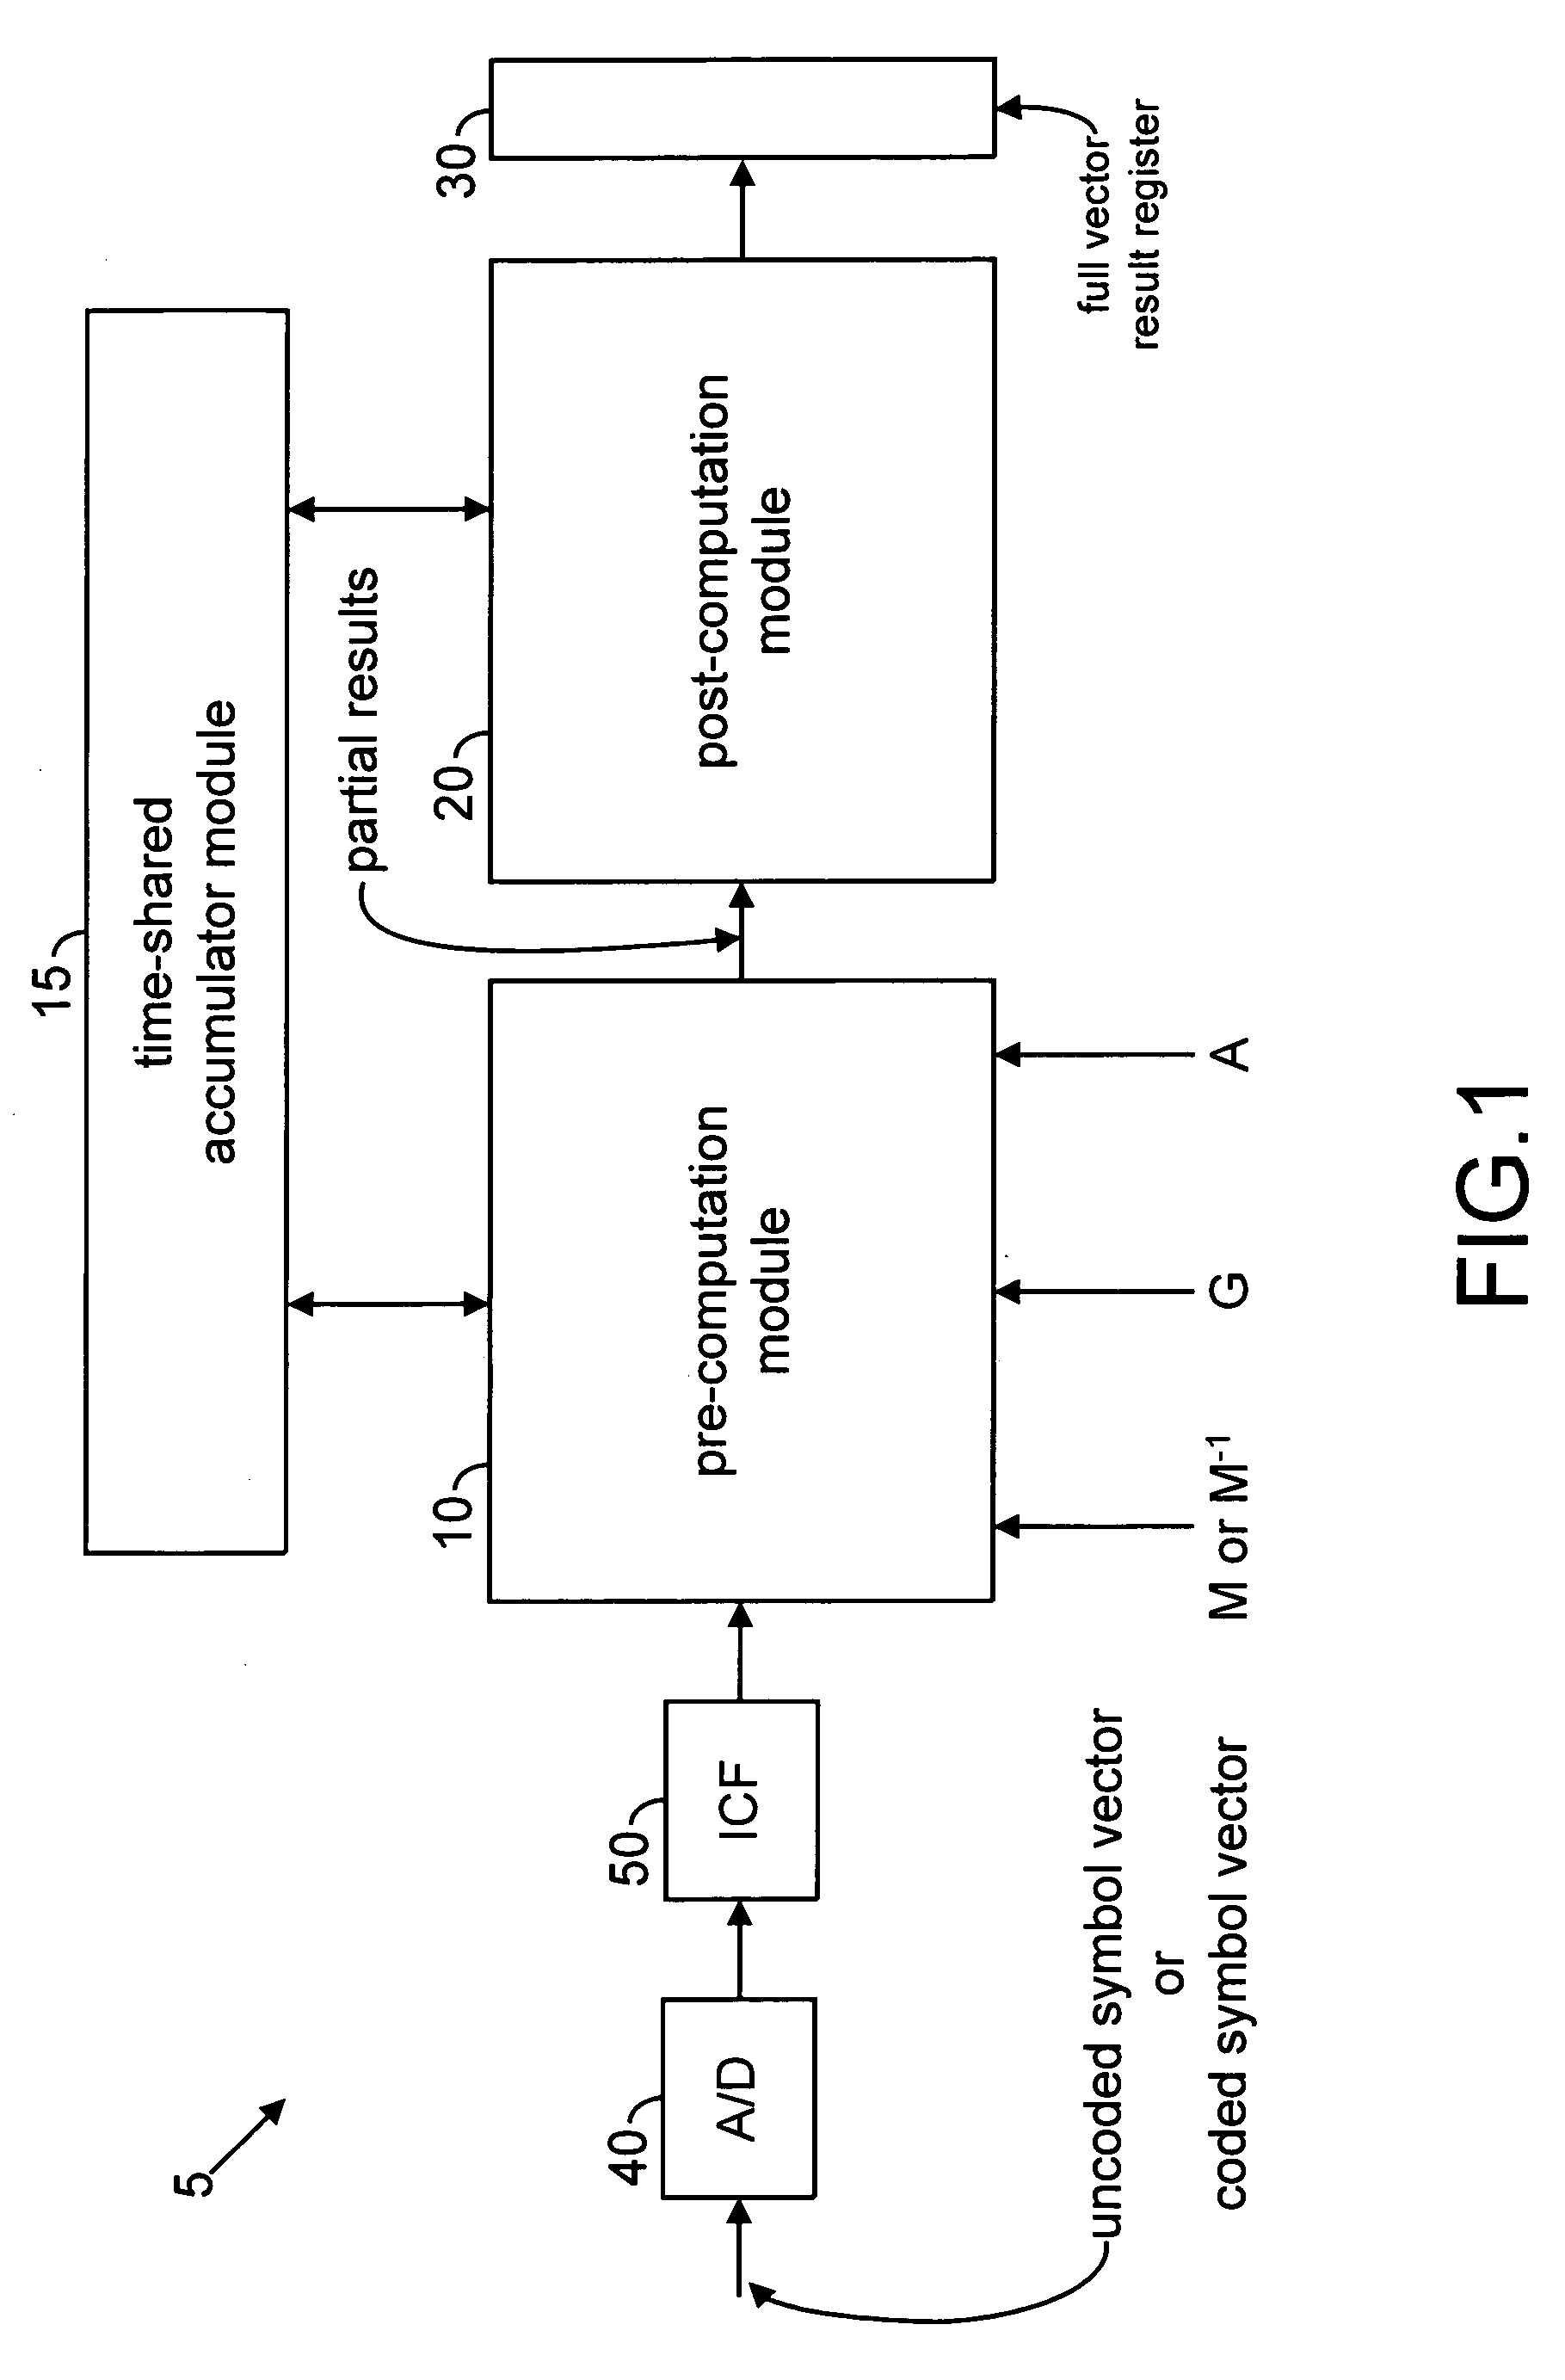 Method and apparatus for efficient matrix multiplication in a direct sequence CDMA system